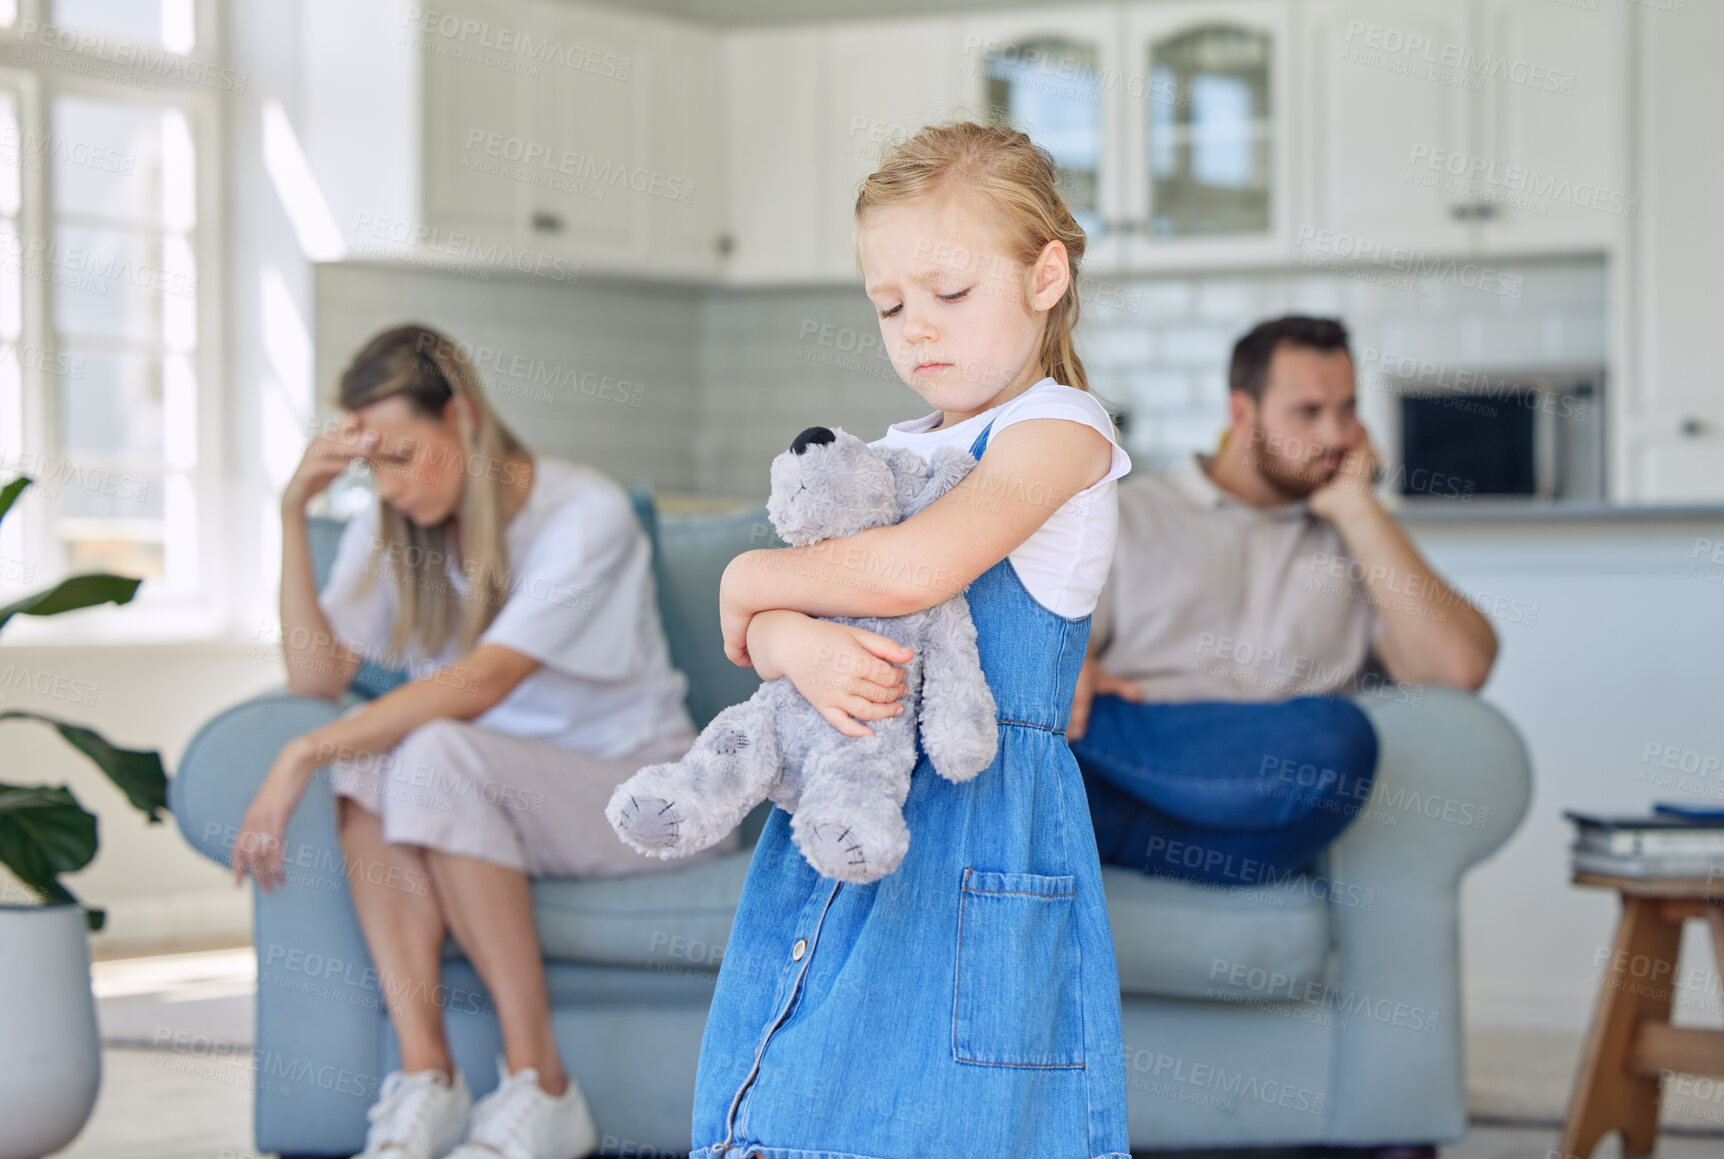 Buy stock photo An upset little girl squeezing her teddy bear while looking sad and depressed while her parents argue in the background. Thinking about her parents breaking up or getting divorced is causing stress